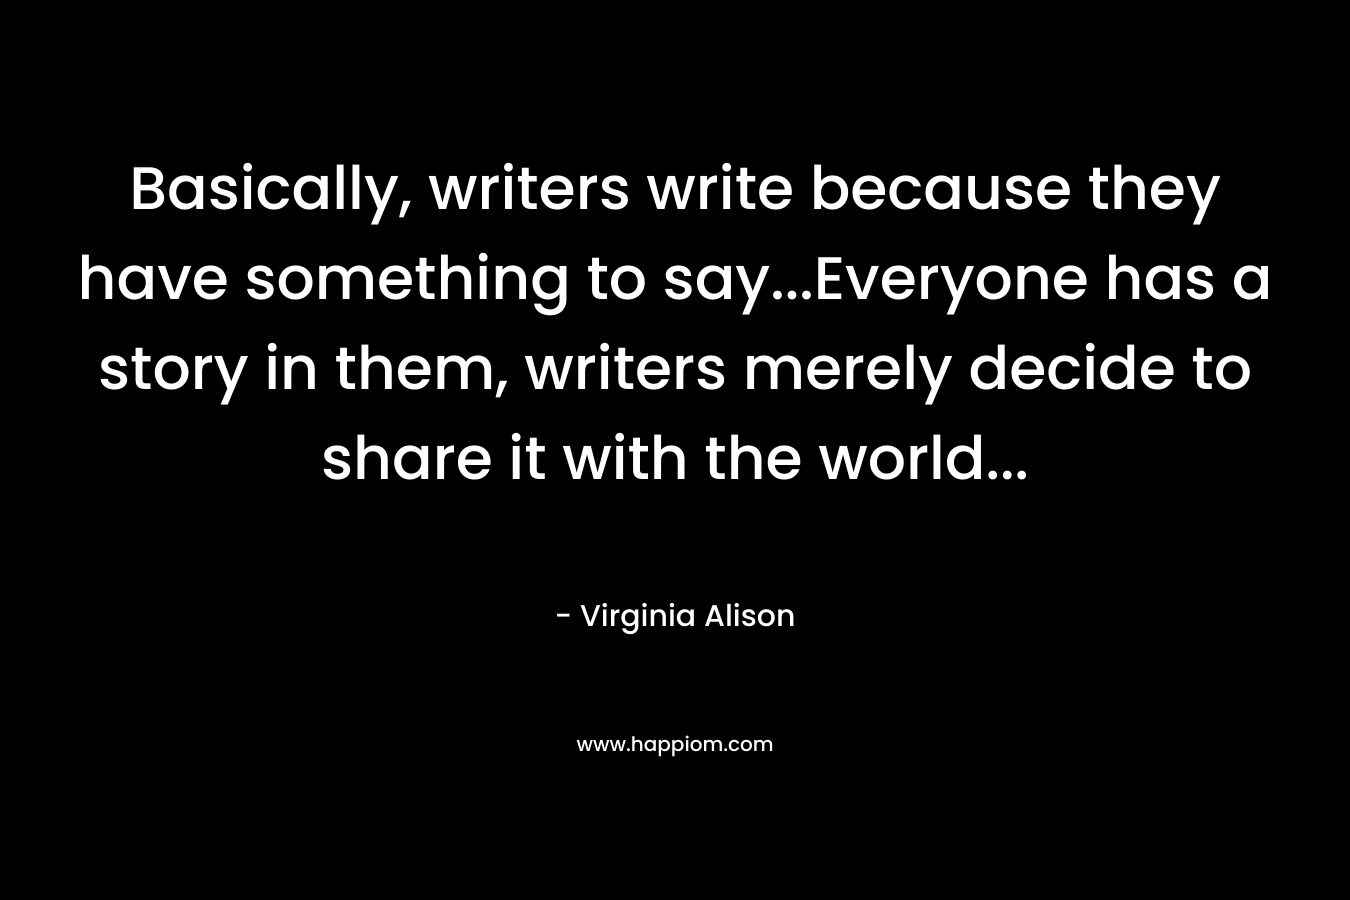 Basically, writers write because they have something to say...Everyone has a story in them, writers merely decide to share it with the world...